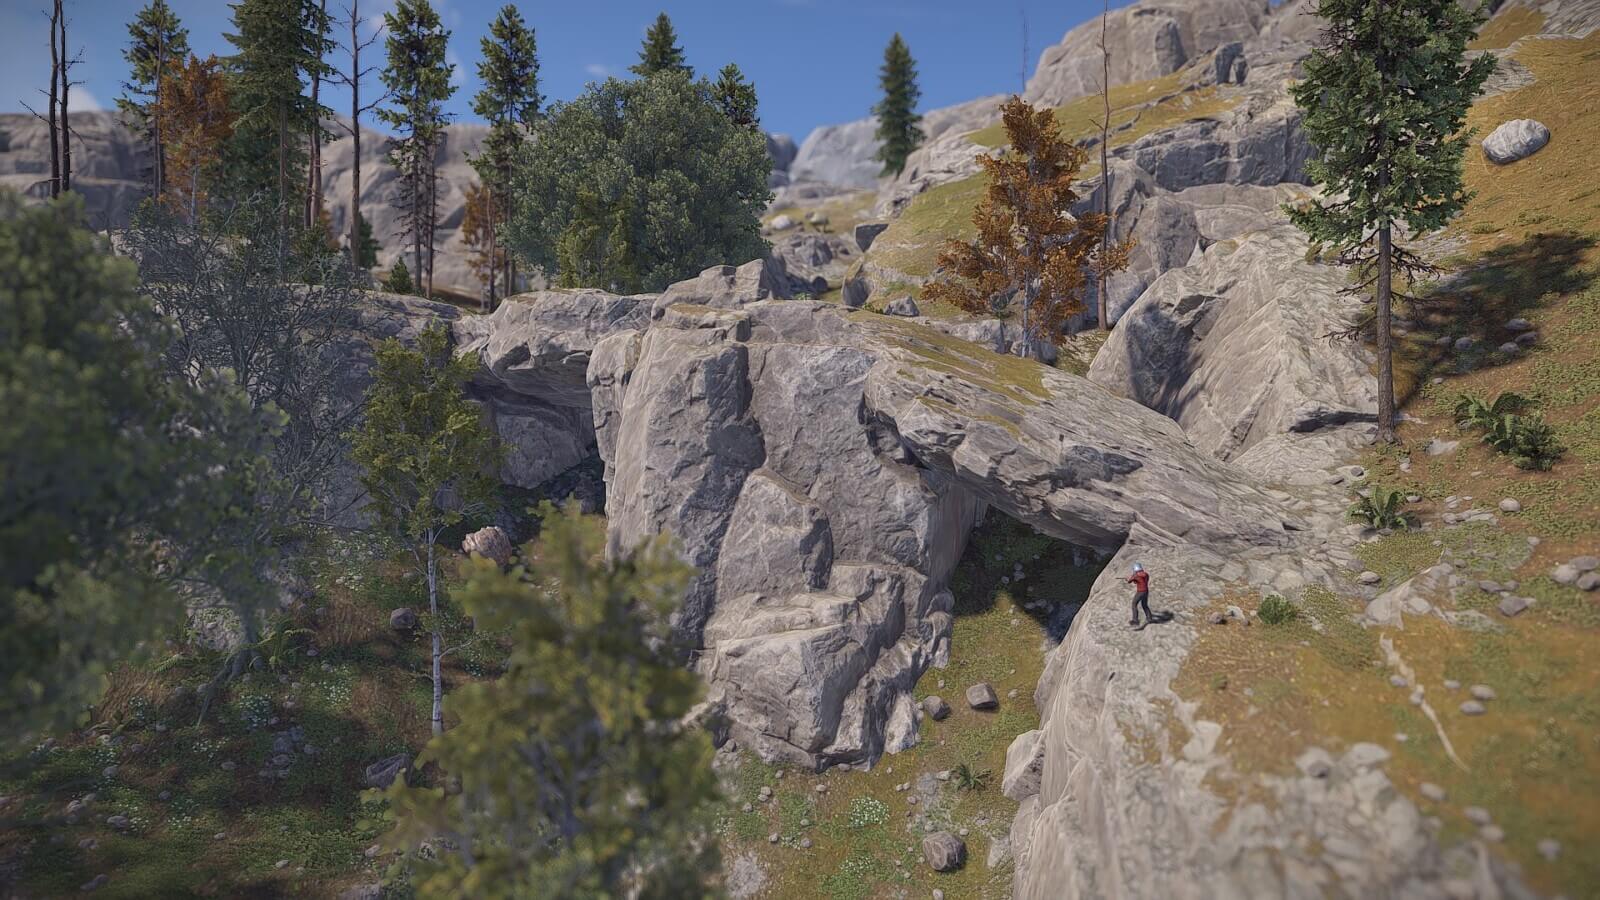 Integrated into the mountains on observer island you may come across unique natural rock bridges and formations